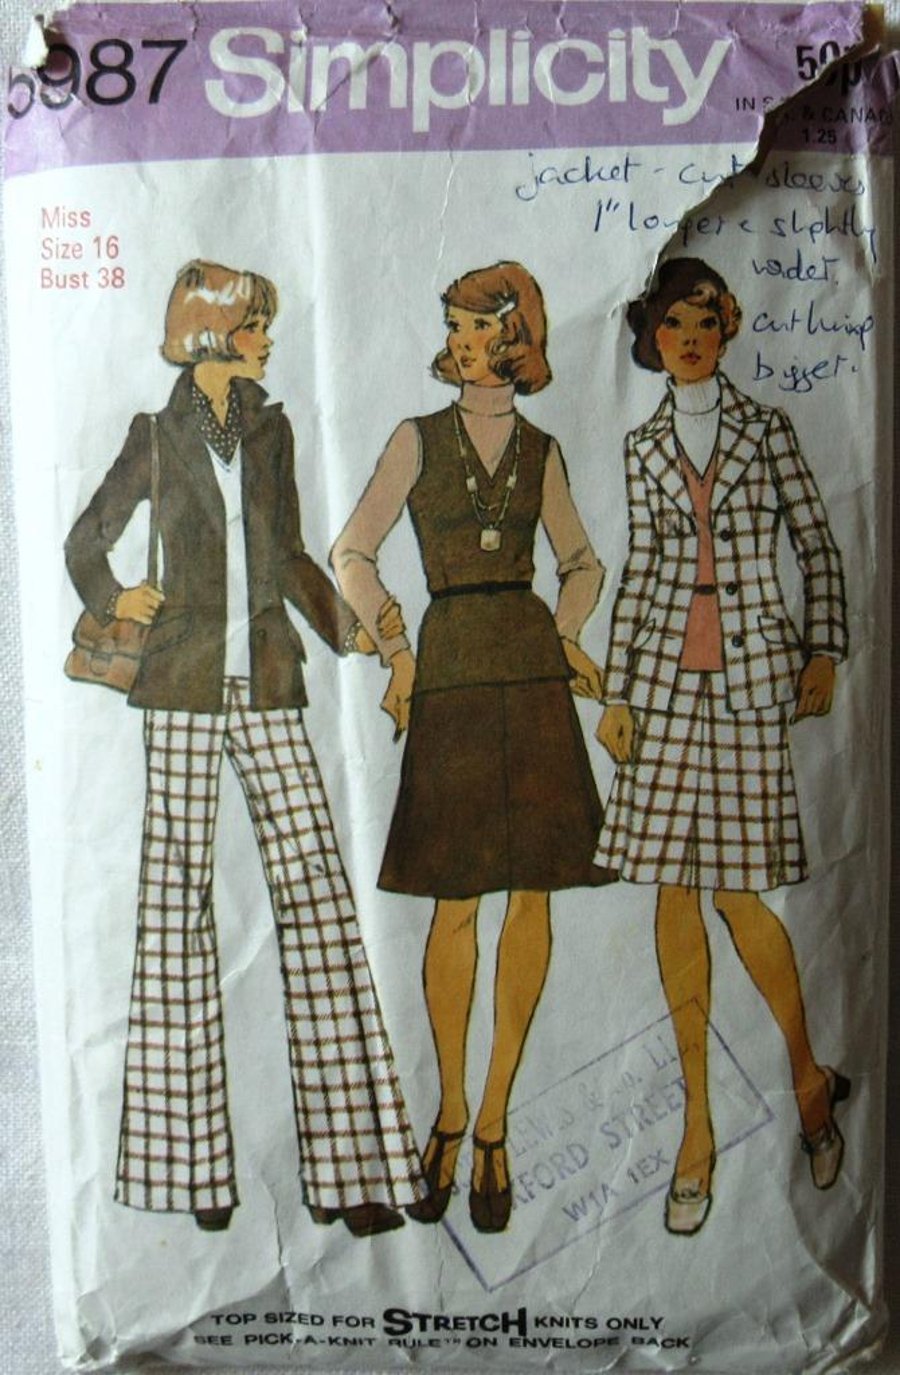 A sewing pattern for a misses' jacket, top, skirt and trousers in size 16 